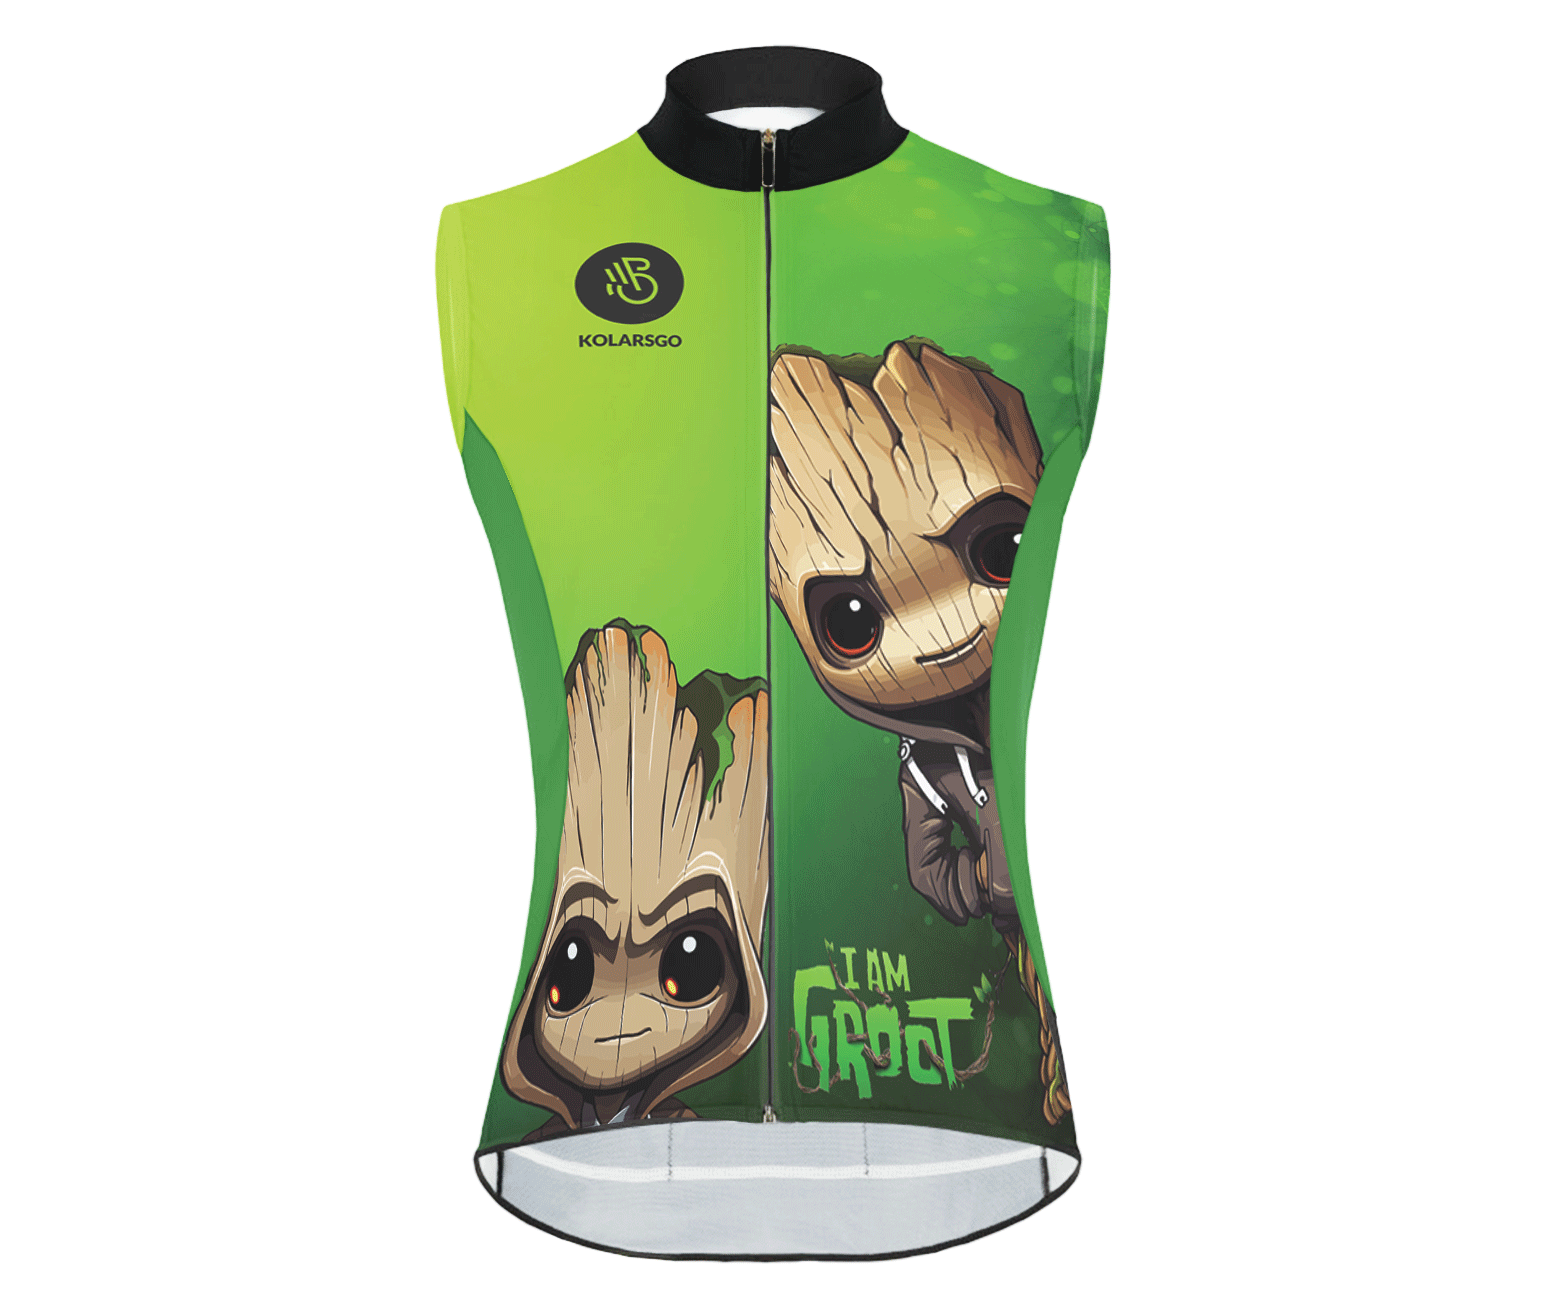 Cycling vest GROOT image 1